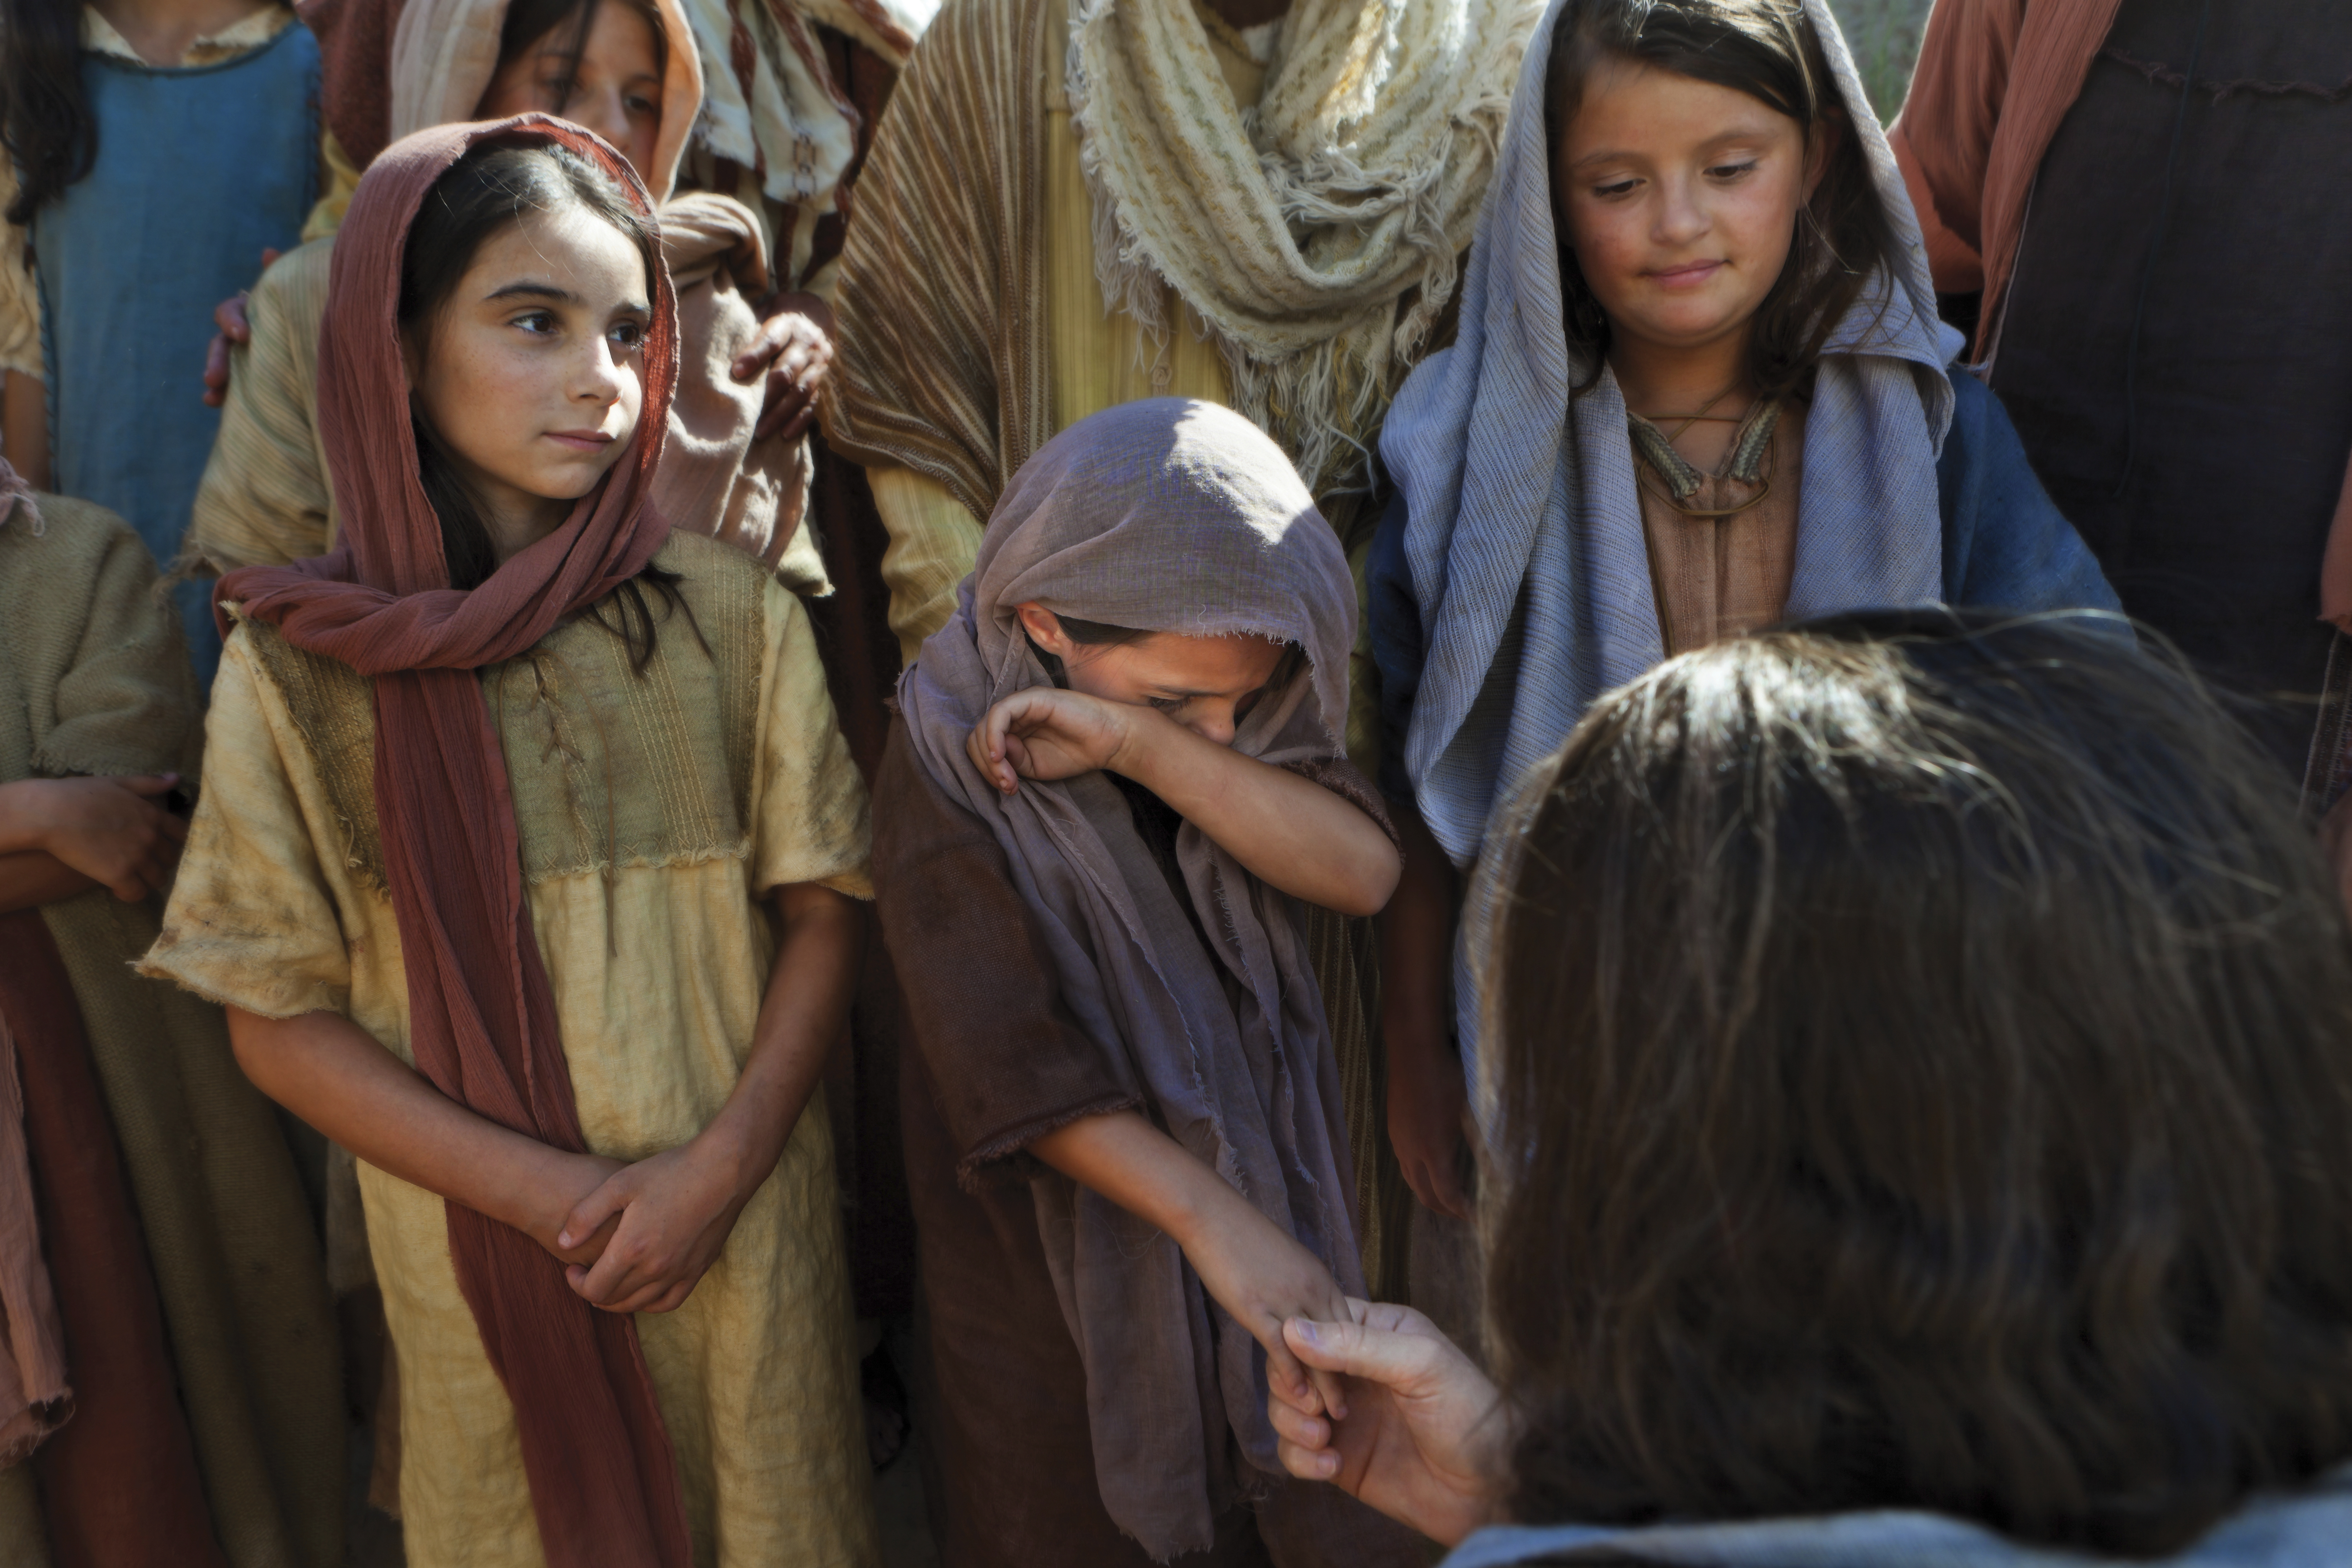 Christ talks with a group of children, one of whom is crying.